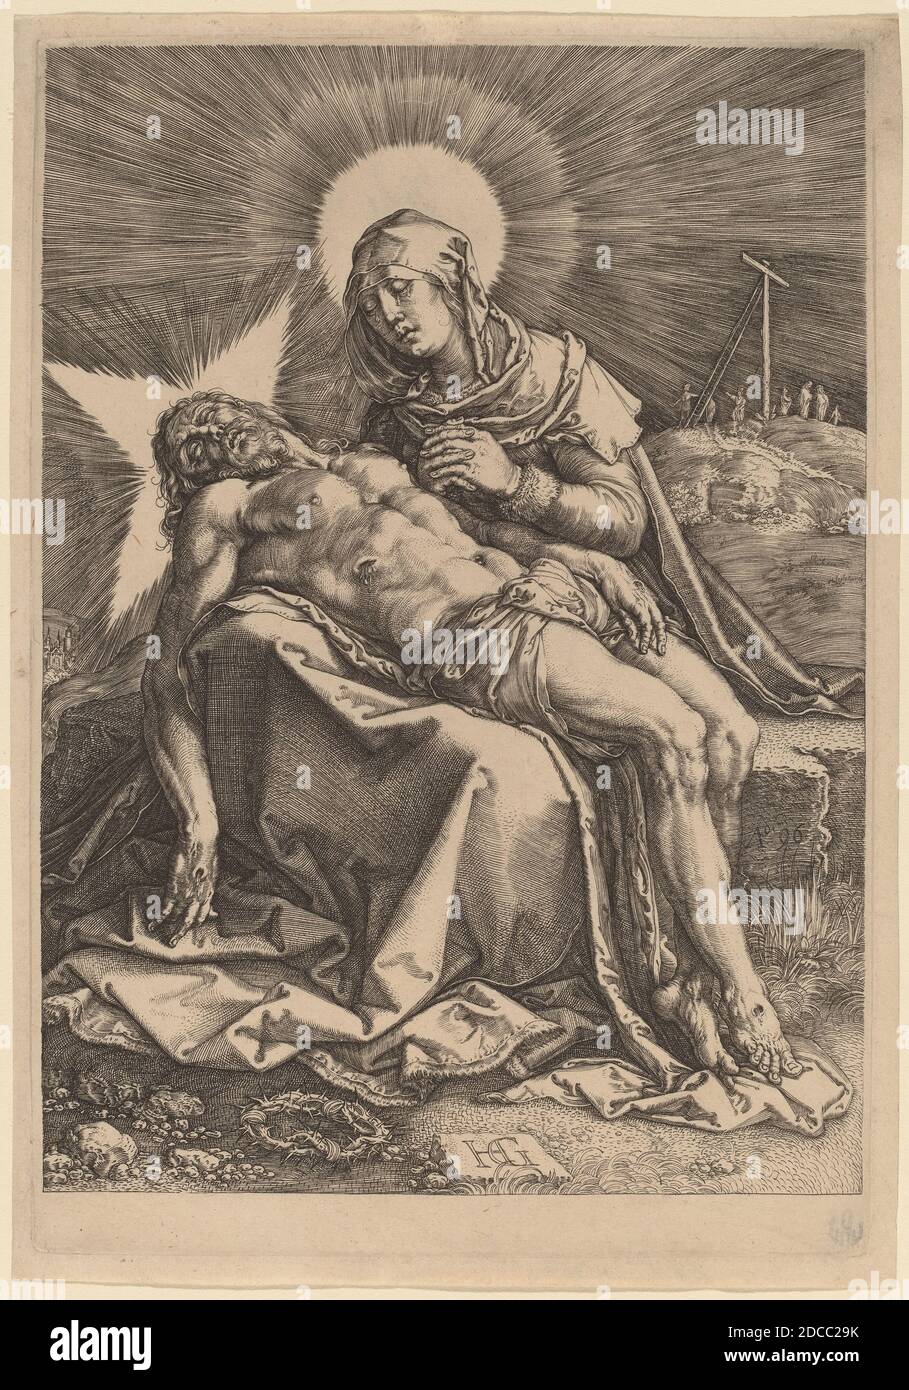 Hendrick Goltzius, (artist), Dutch, 1558 - 1617, Pietà (The Sorrowing Virgin with the Dead Christ in Her Lap), 1596, engraving Stock Photo